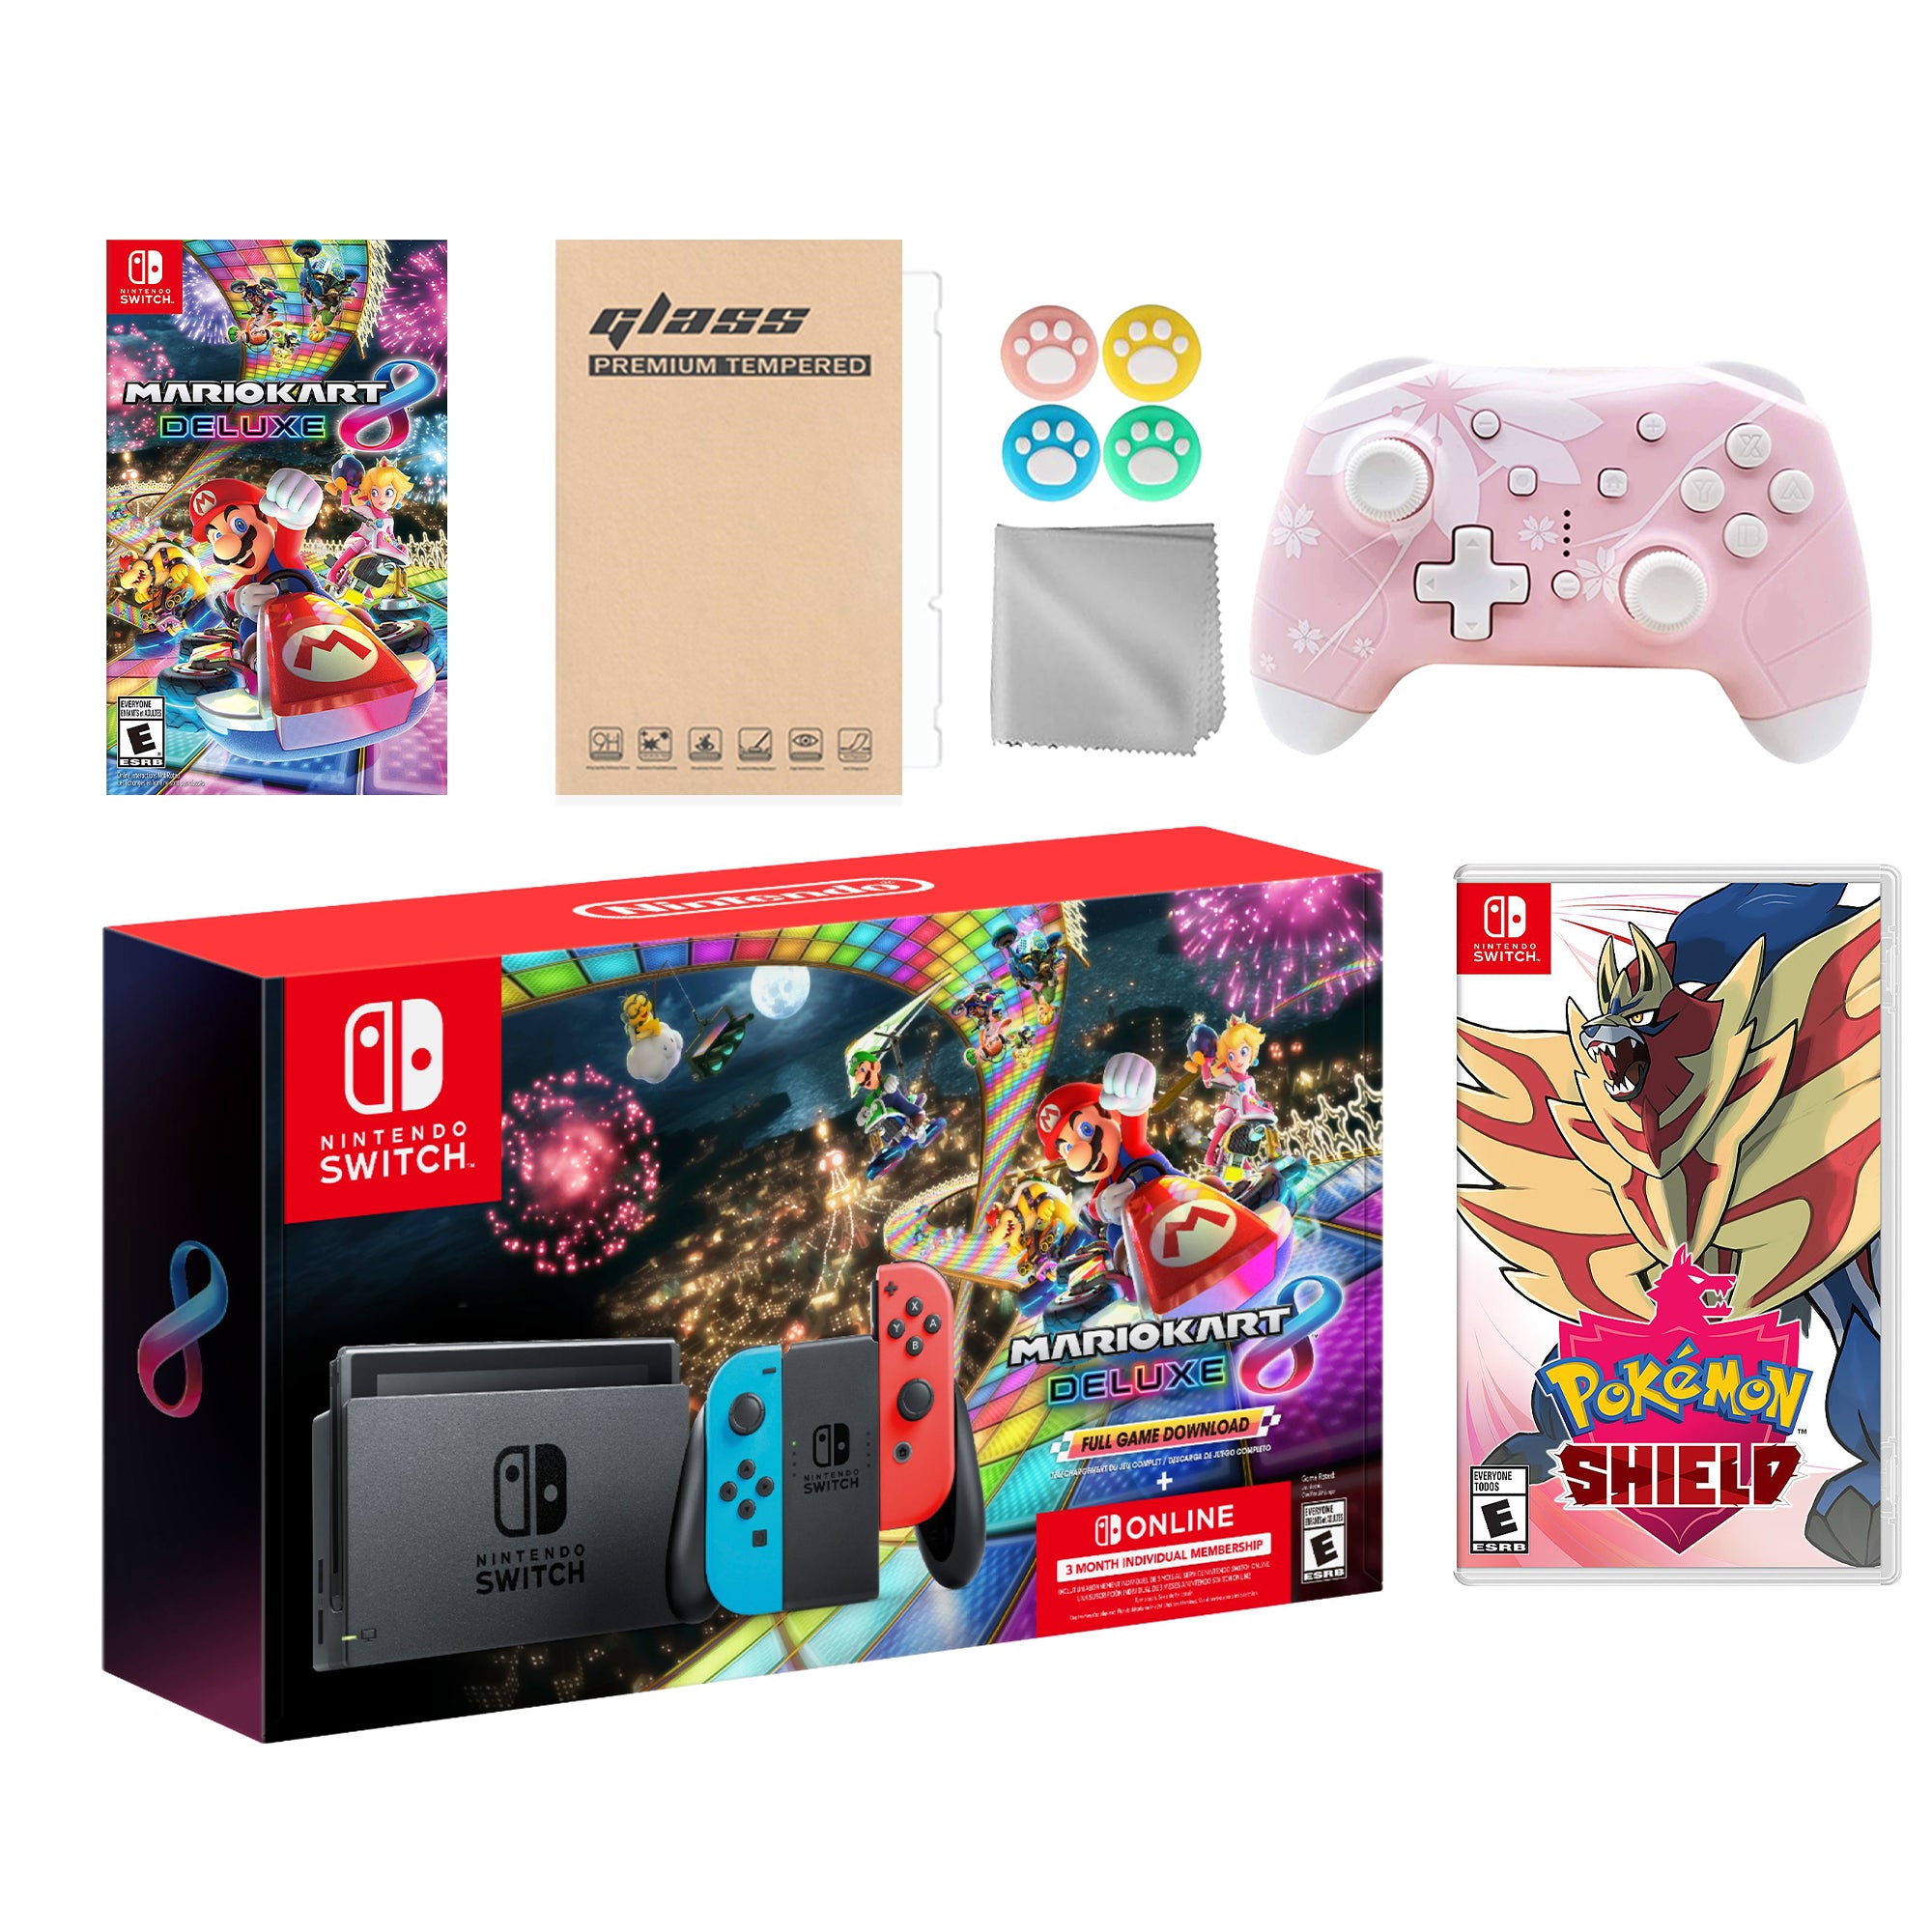 Nintendo Switch Mario Kart 8 Deluxe Bundle: Red Blue Console, Mario Kart 8 & Membership, Pokemon Shield, Mytrix Wireless Pro Controller Pink Cherry Blossom and Accessories